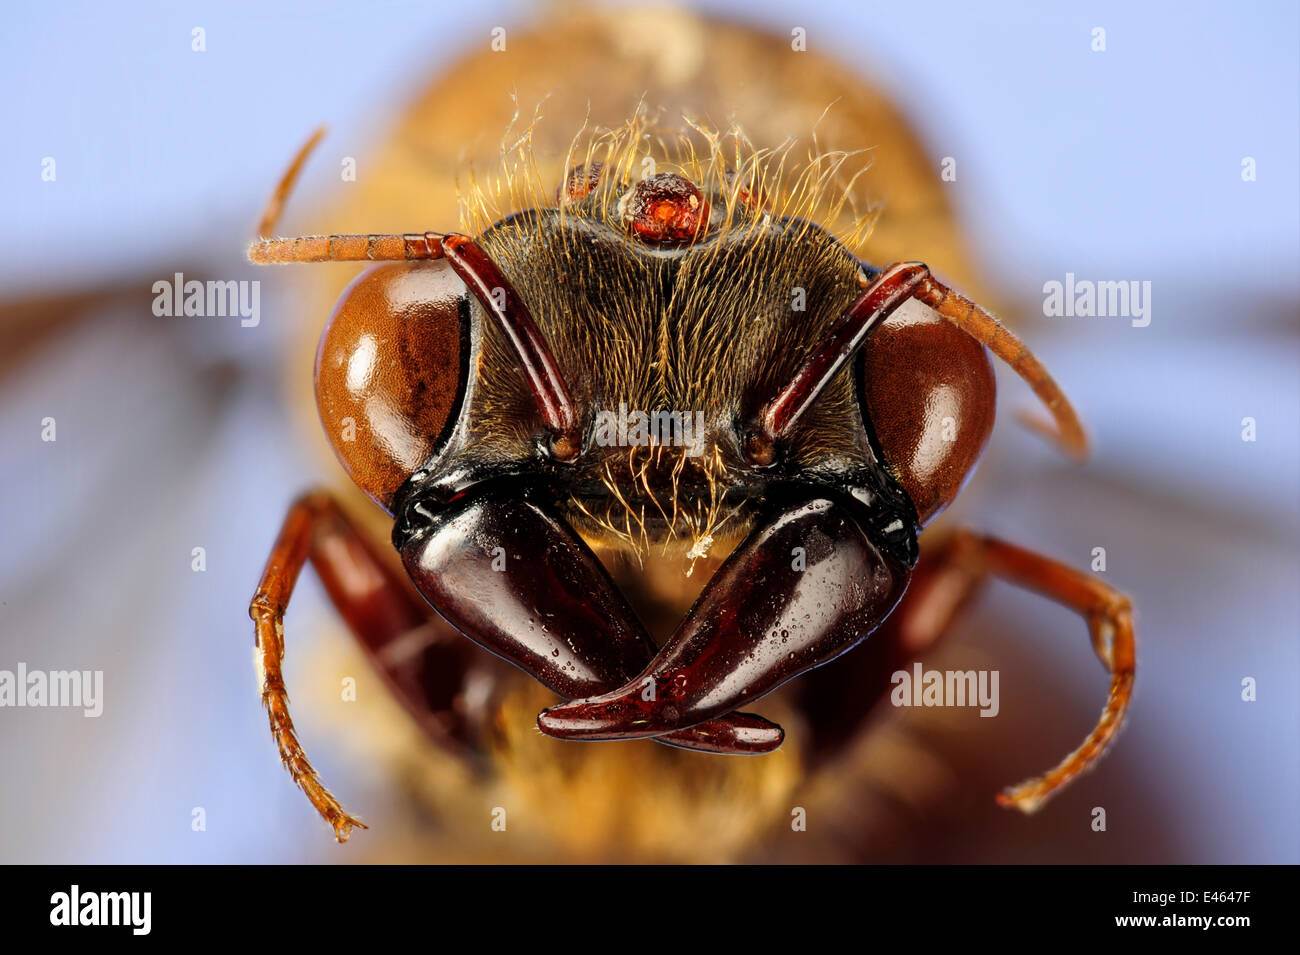 Army ant (Dorylus sp.) close-up of male. Specimen photographed using digital focus stacking Stock Photo